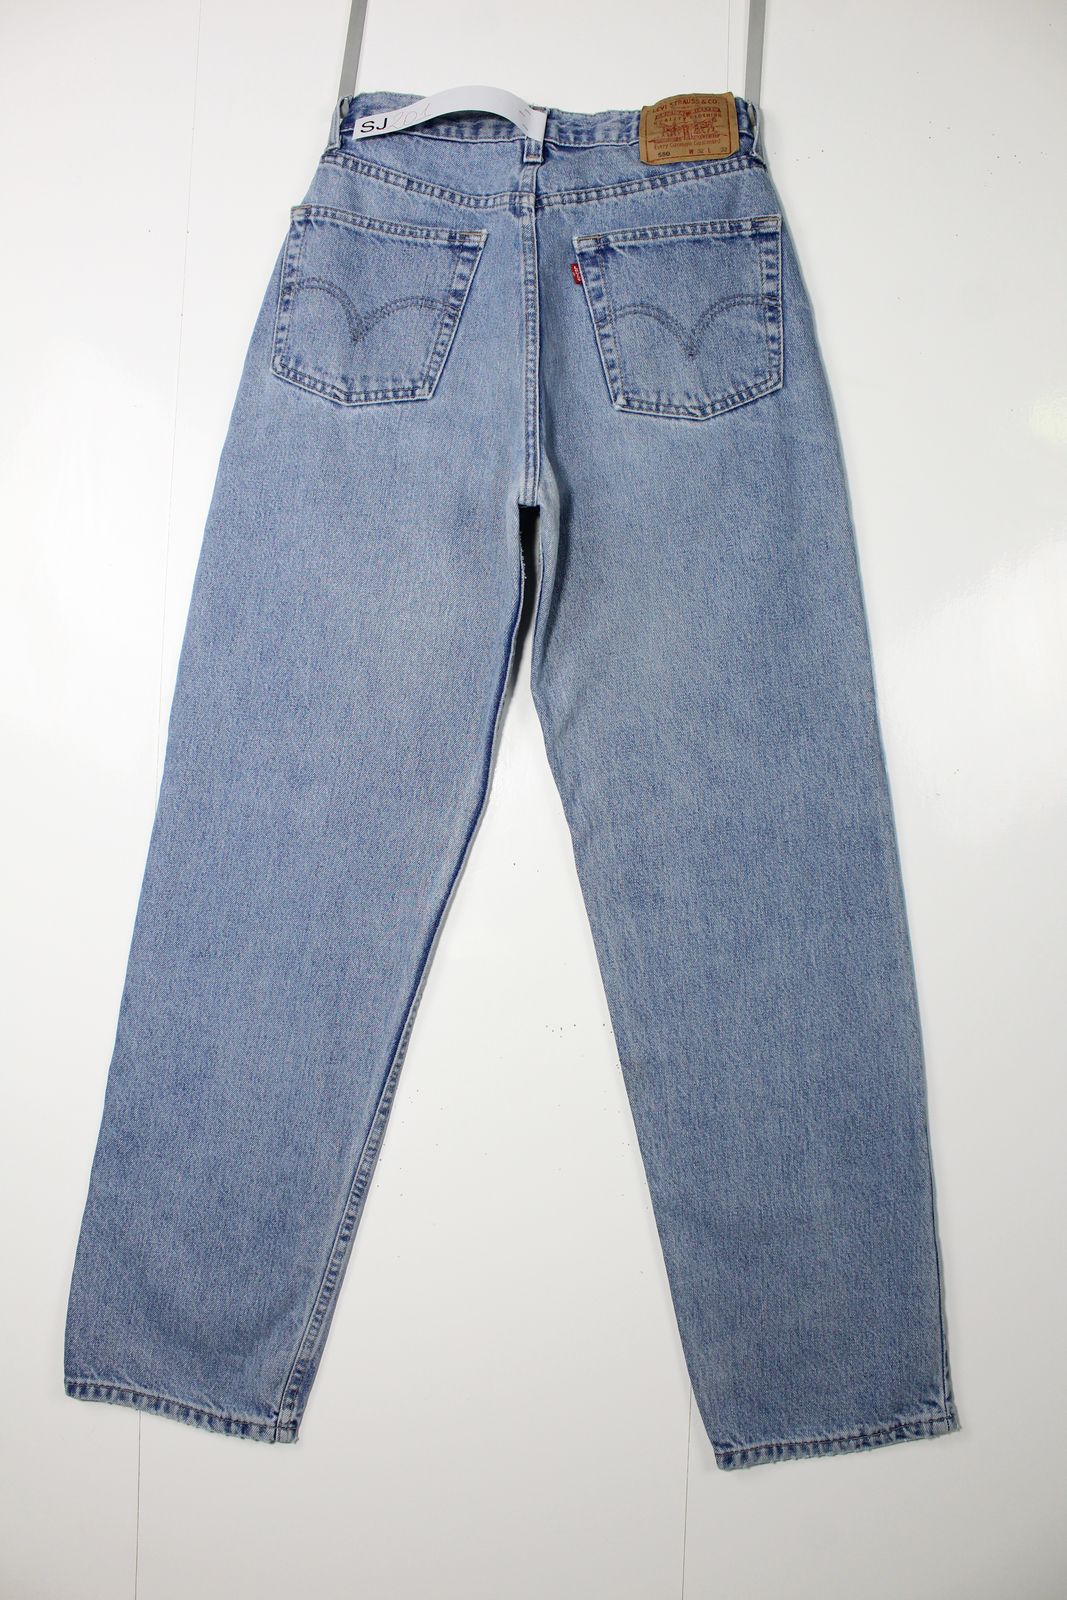 Levi's 550 Relaxed Fit Denim W32 L32 Made In USA Jeans Vintage